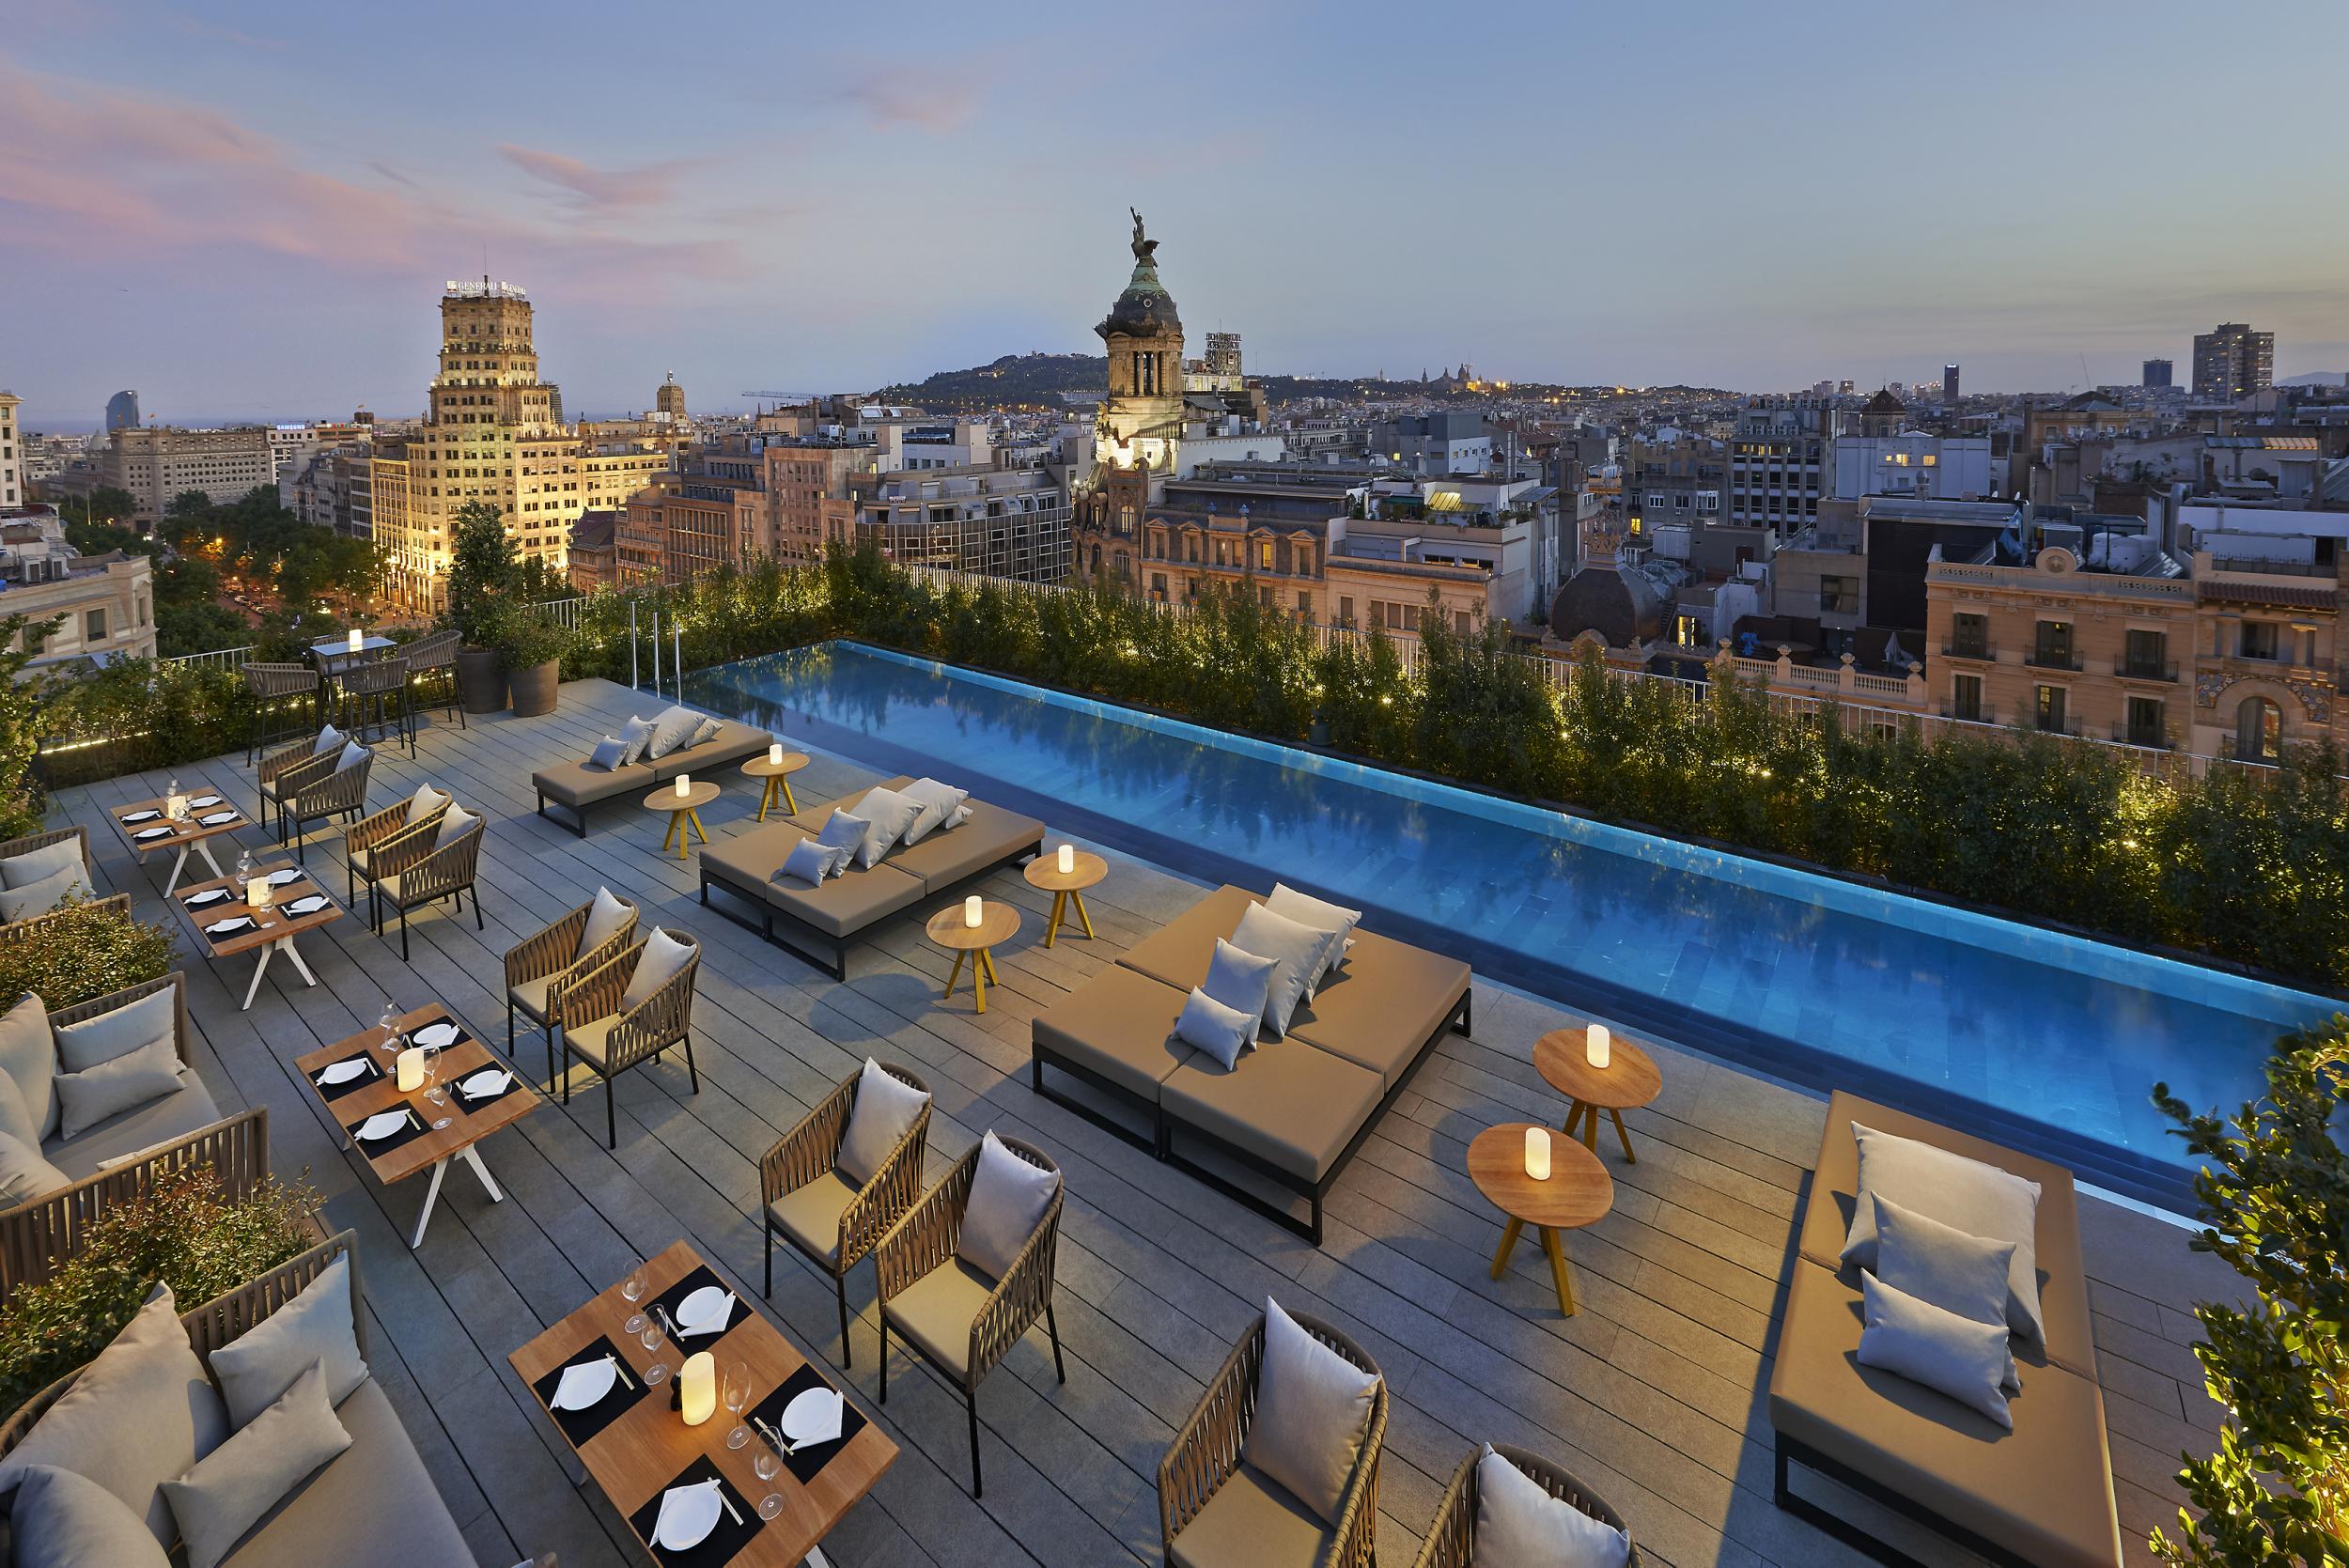 Enjoy incredible views of the city from the roof top of the Mandarin Oriental